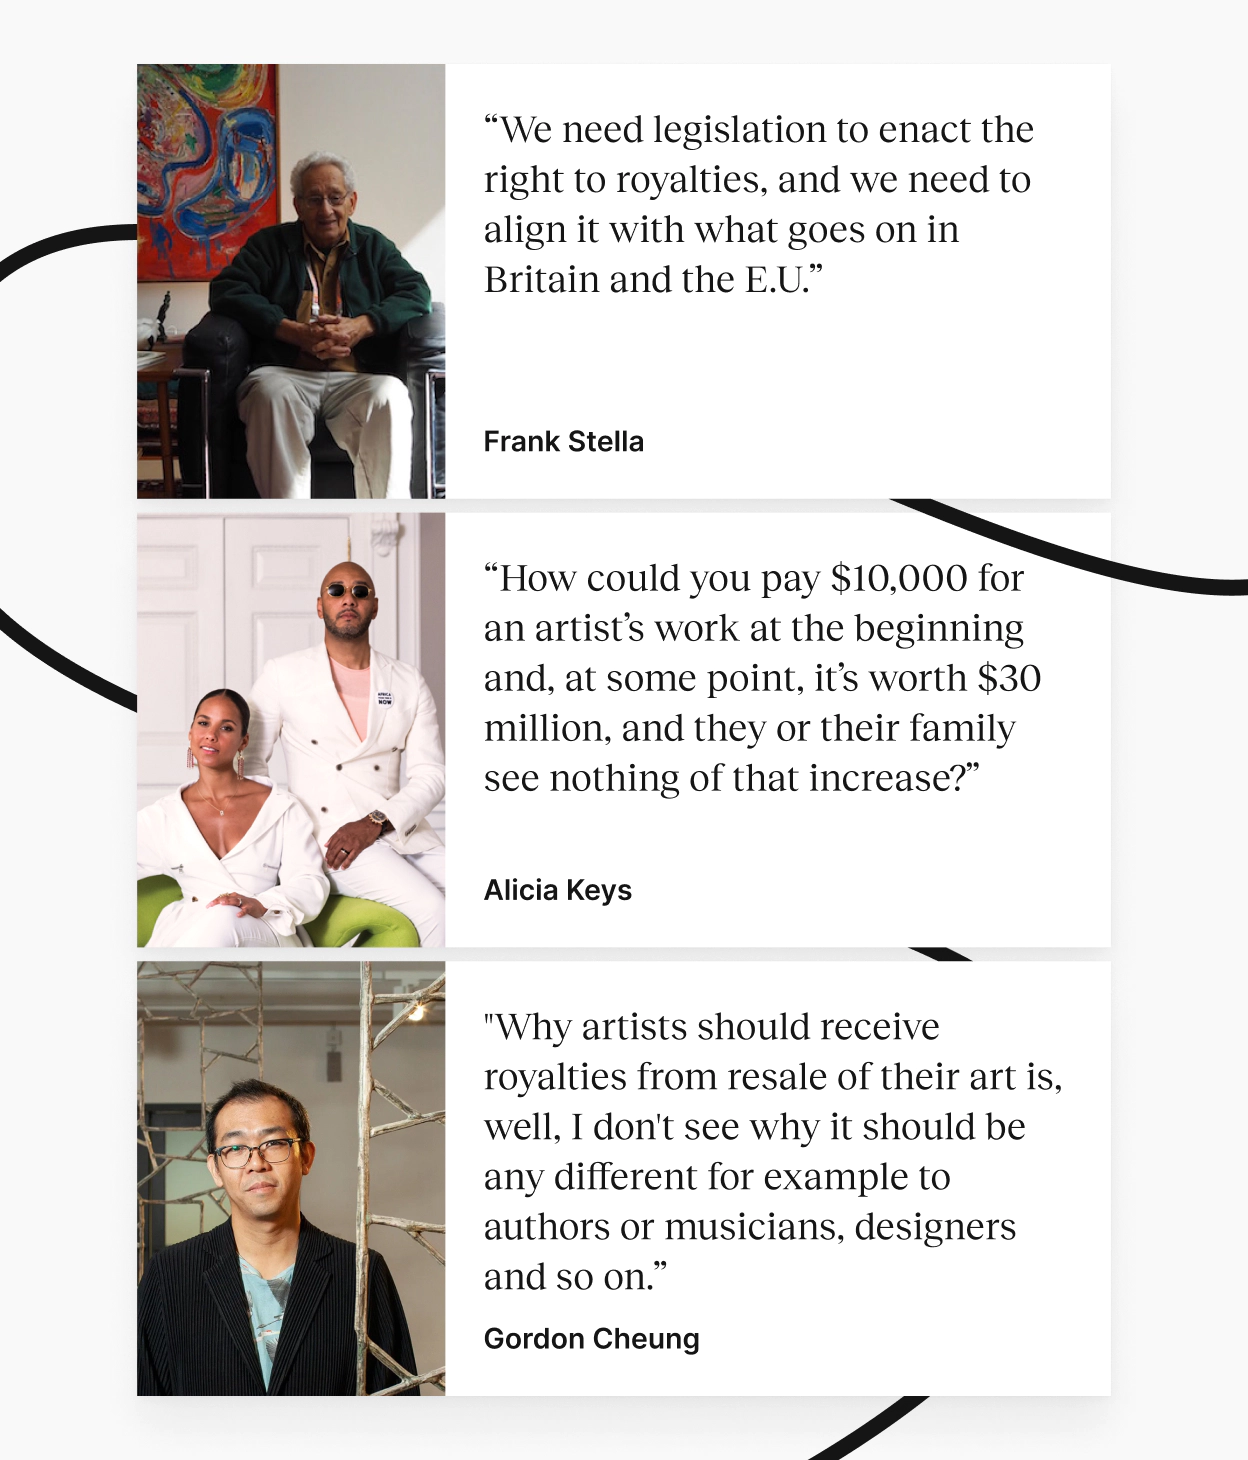 Quotes from Alicia Keys, Frank Stella, and Gordon Cheung about Royalties for artists